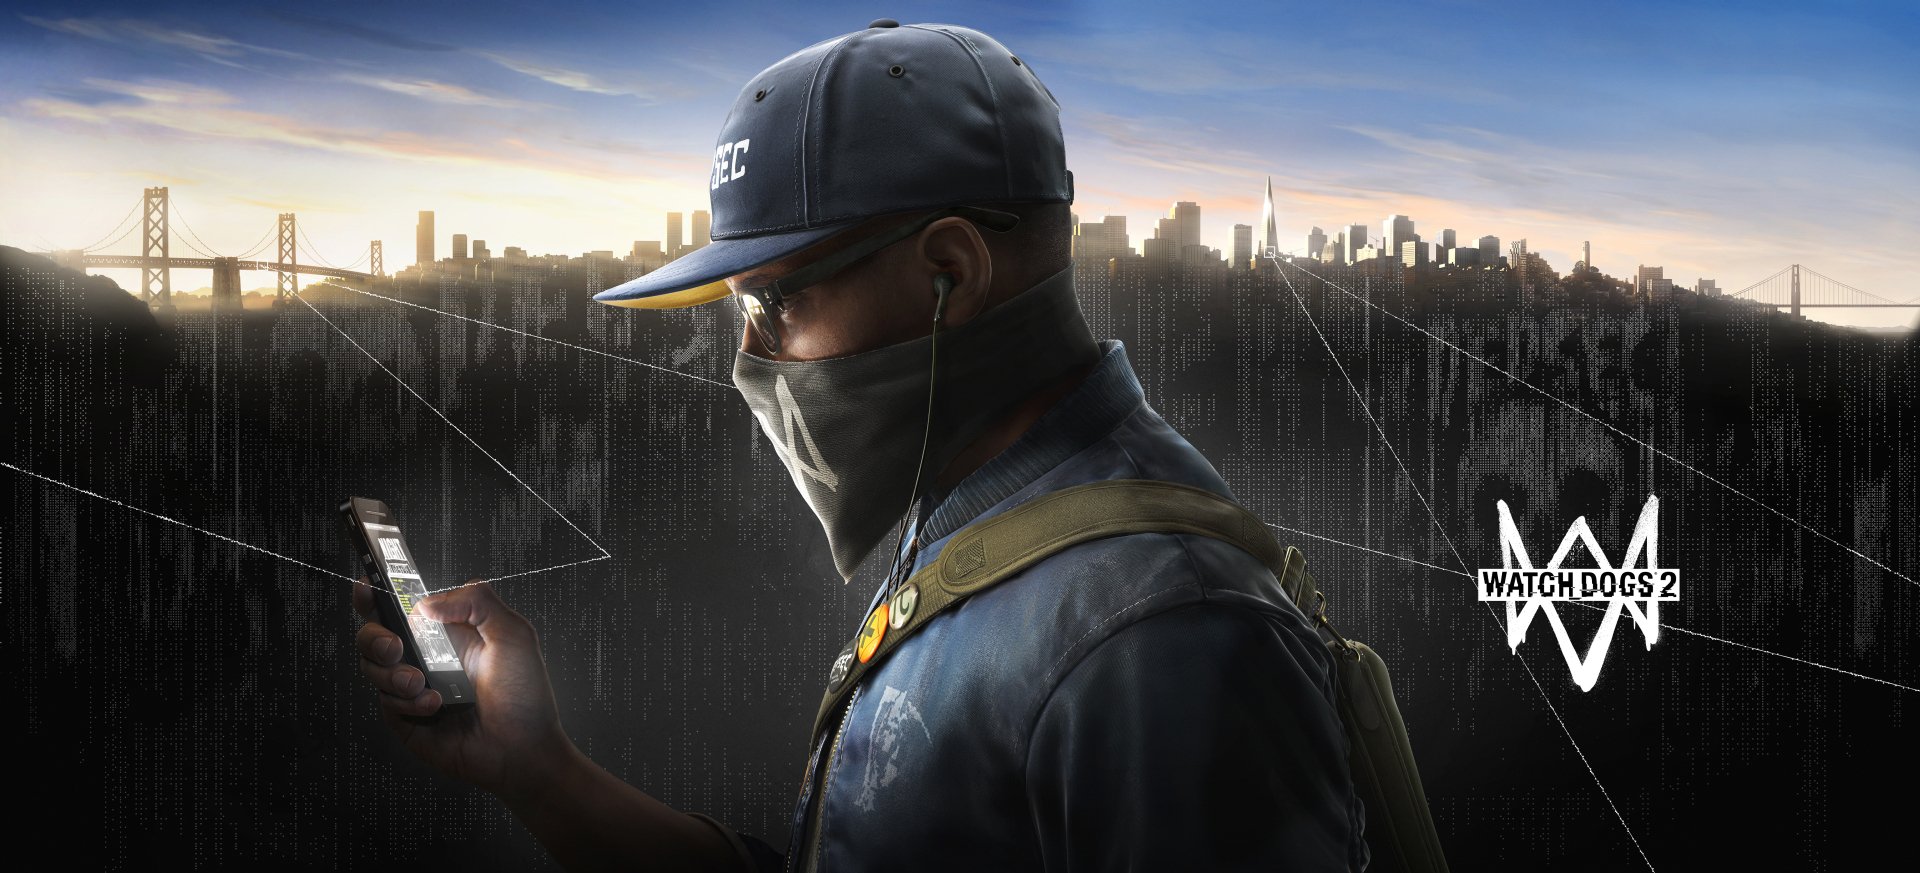 download watch dogs pc free